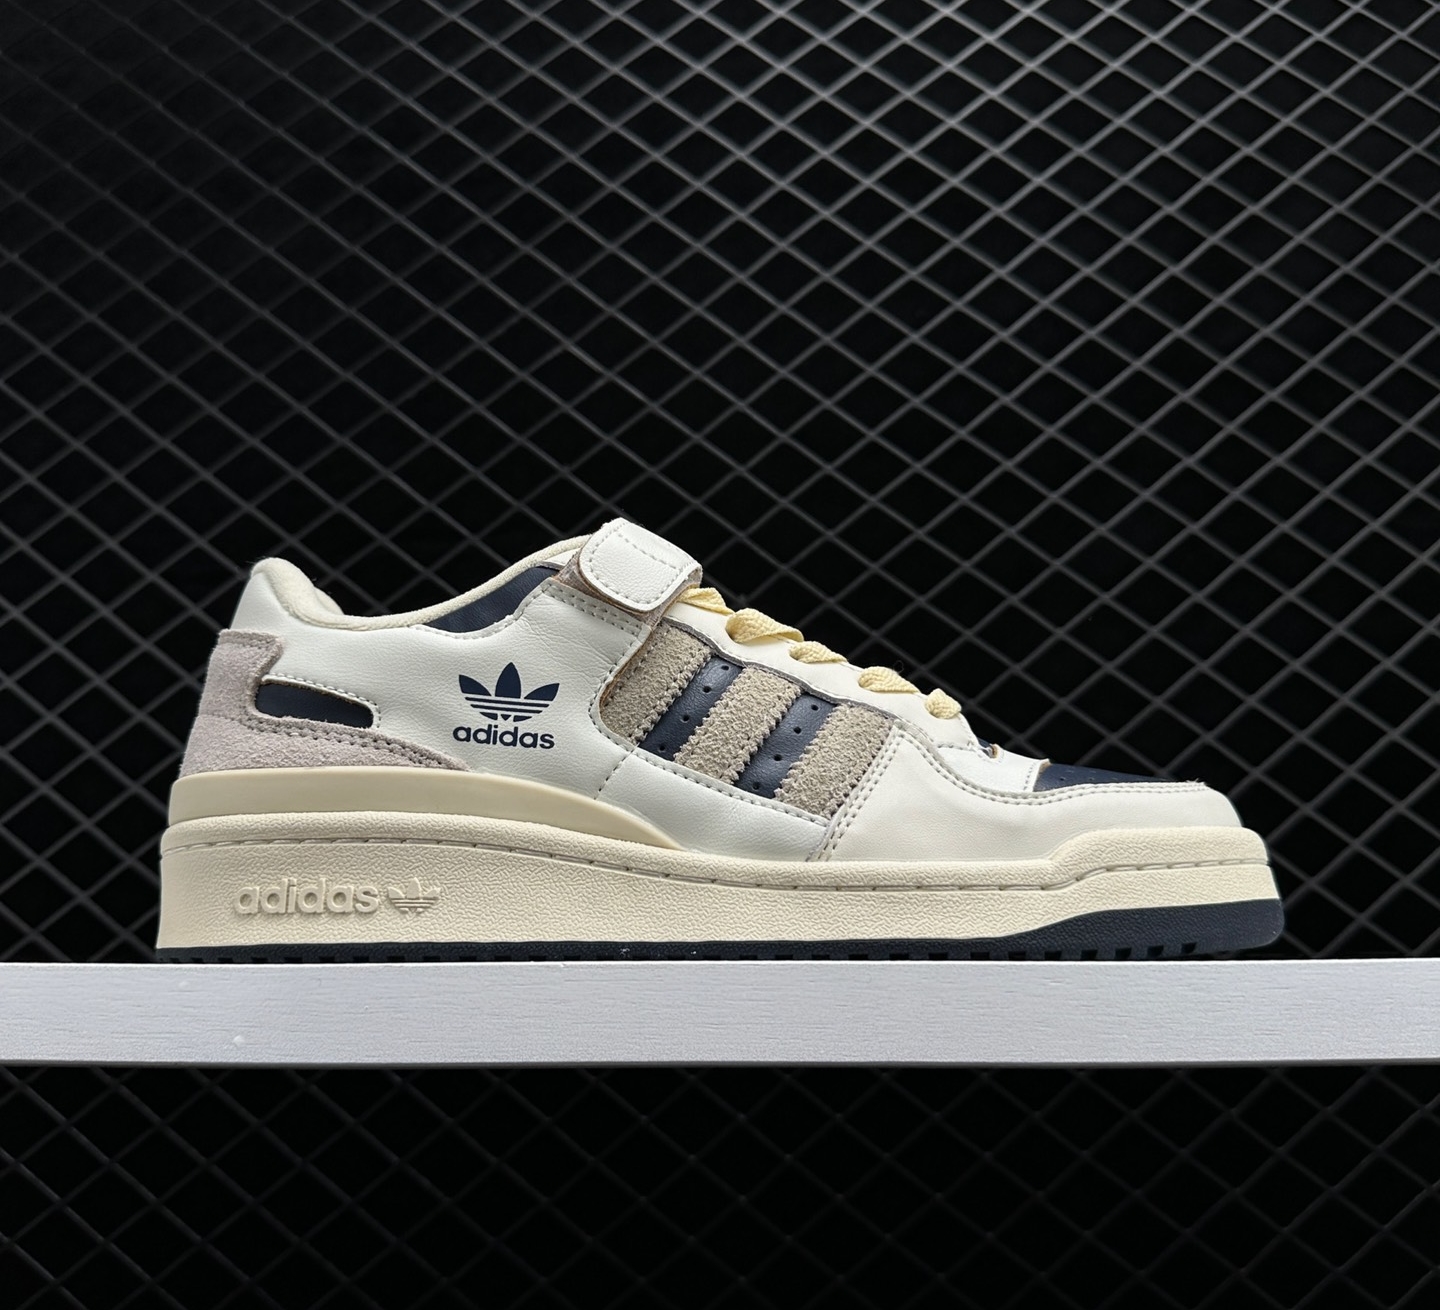 Adidas Forum 84 Low XLD Off White Collegiate Navy GZ6427 - Vintage-Inspired Classic Design for Modern Style